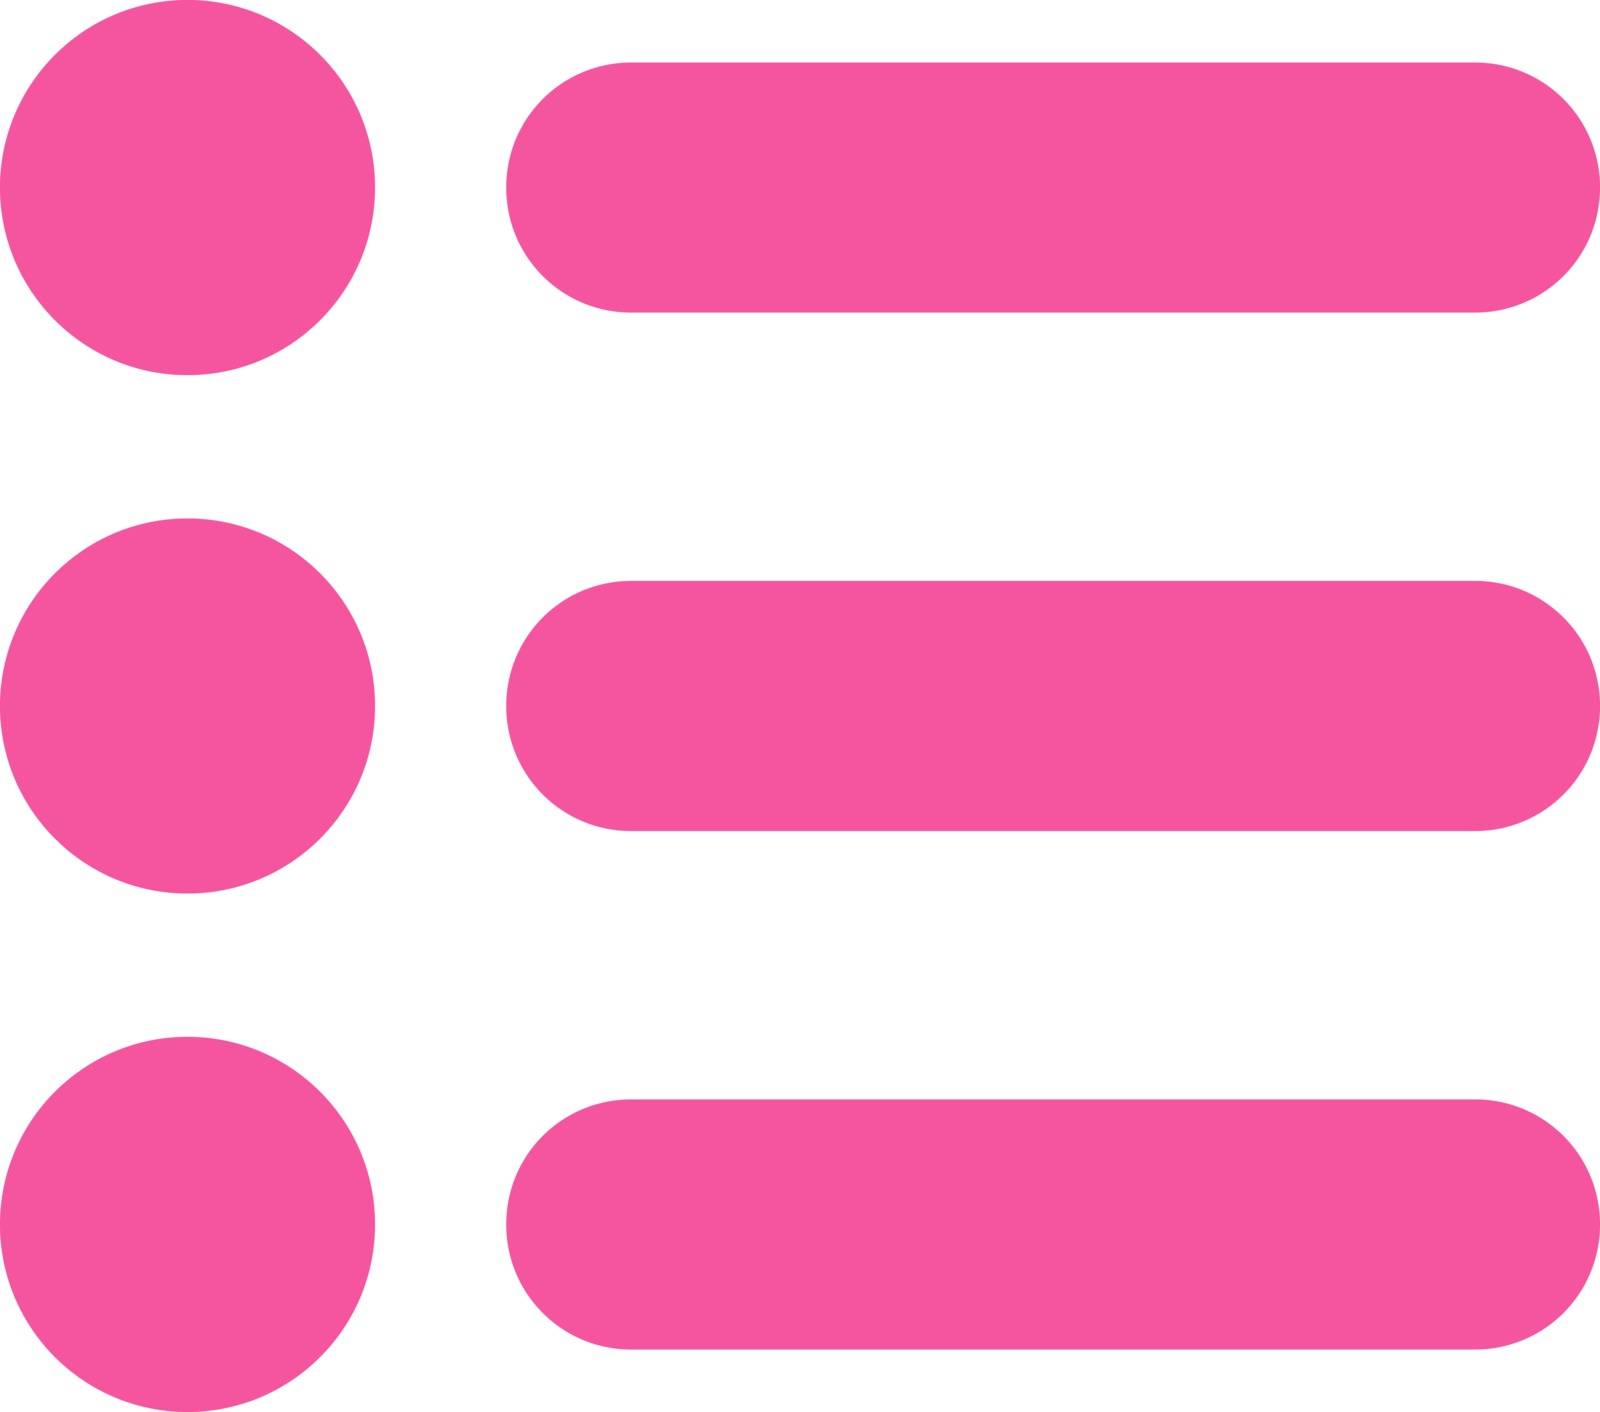 Items icon from Primitive Set. This isolated flat symbol is drawn with pink color on a white background, angles are rounded.